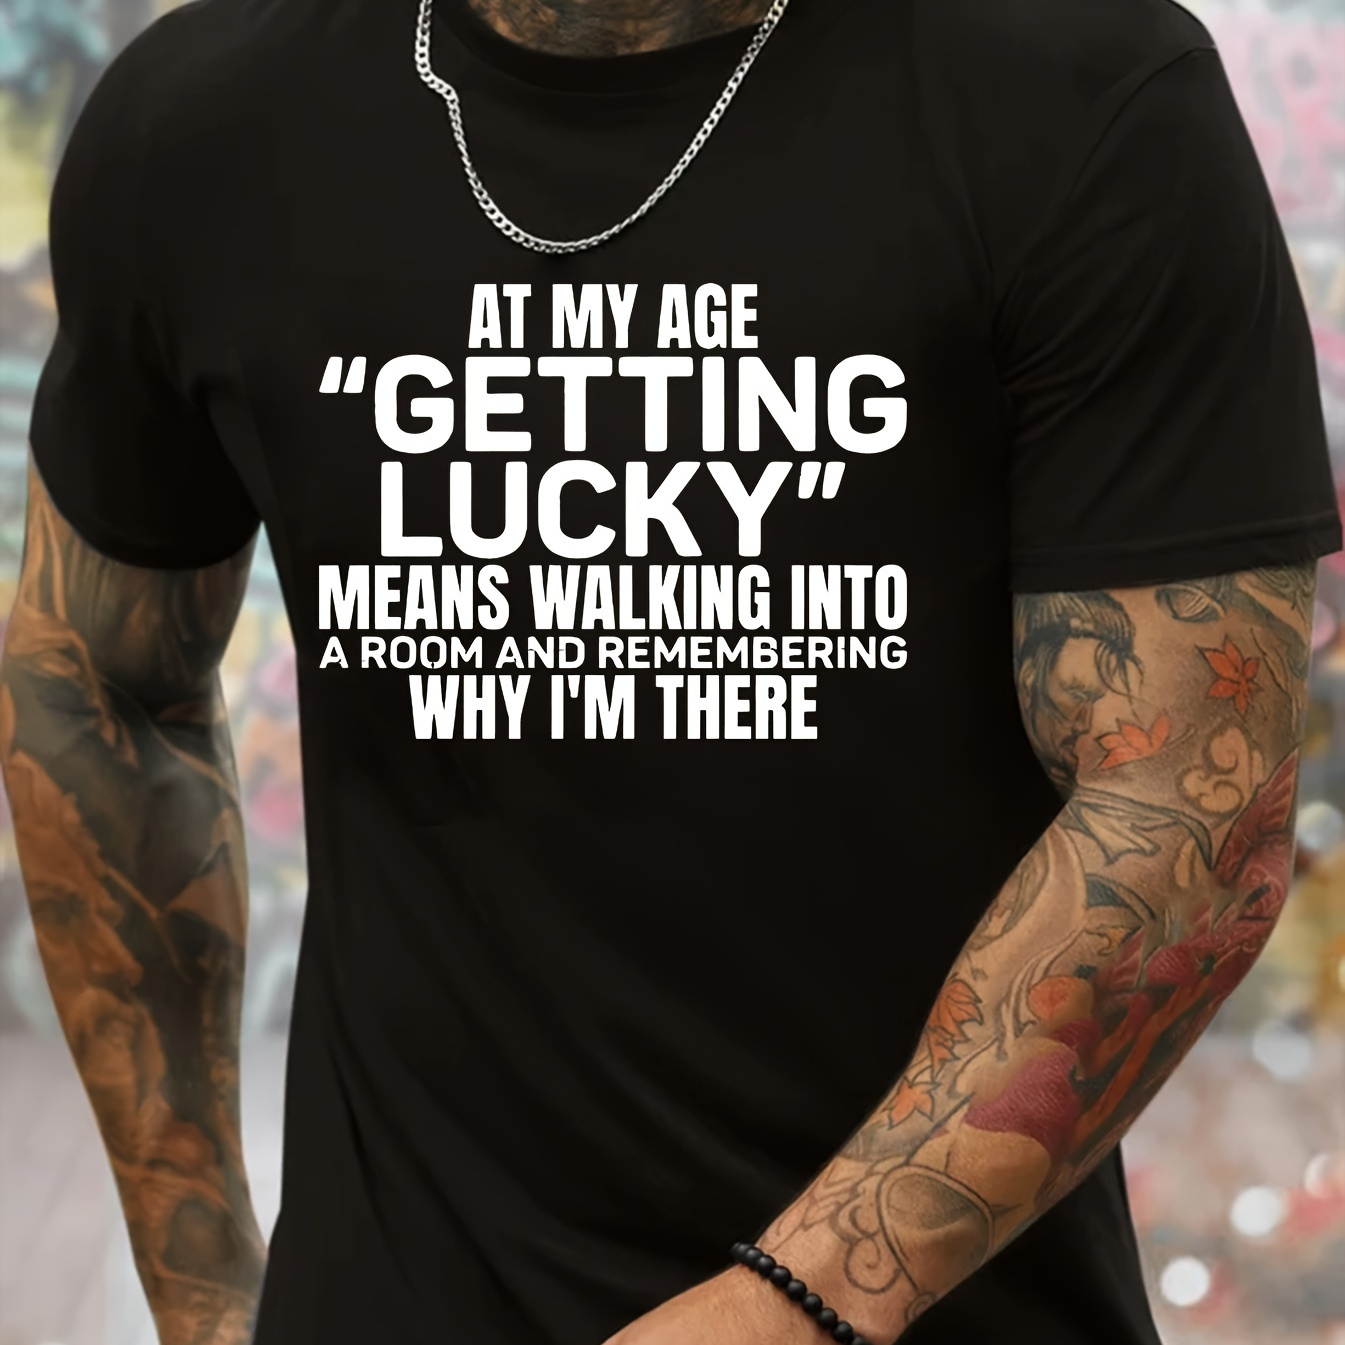 

Getting Lucky Print Men's Round Neck Short Sleeve Tee Fashion Regular Fit T-shirt Top For Spring Summer Holiday